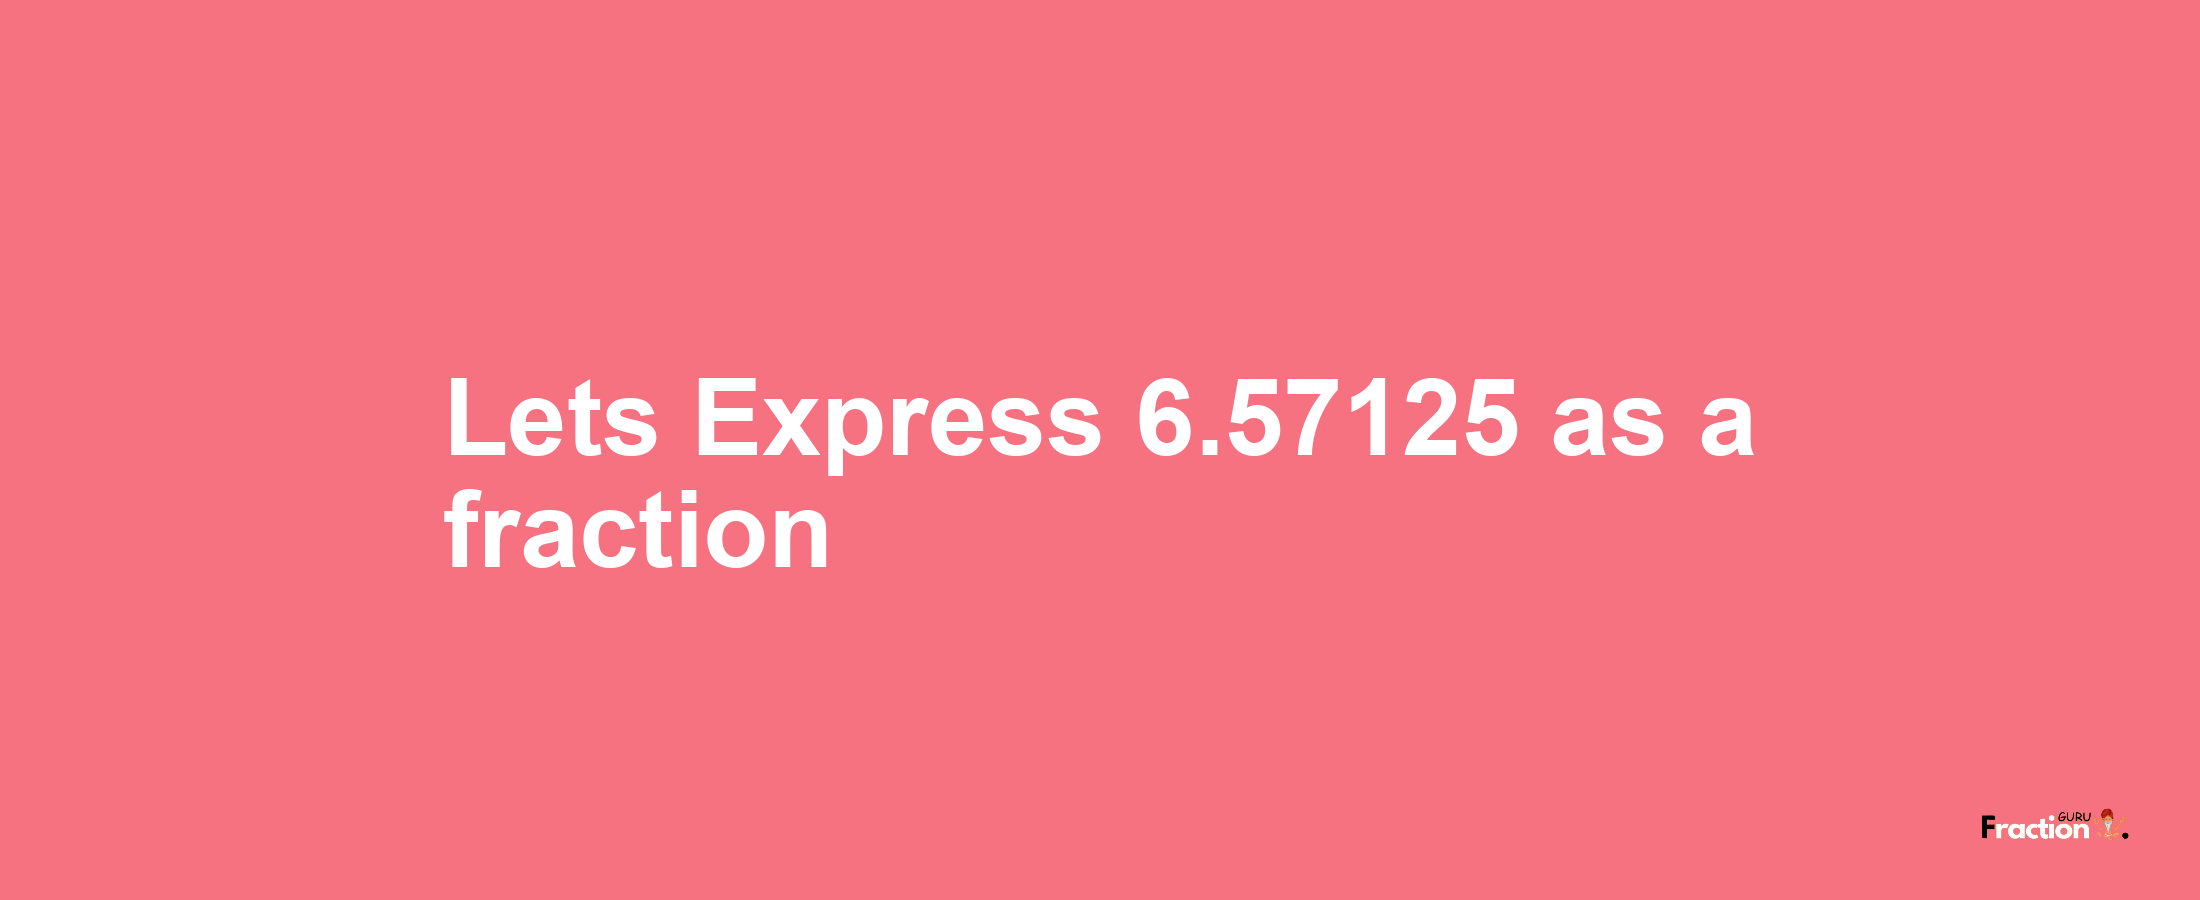 Lets Express 6.57125 as afraction